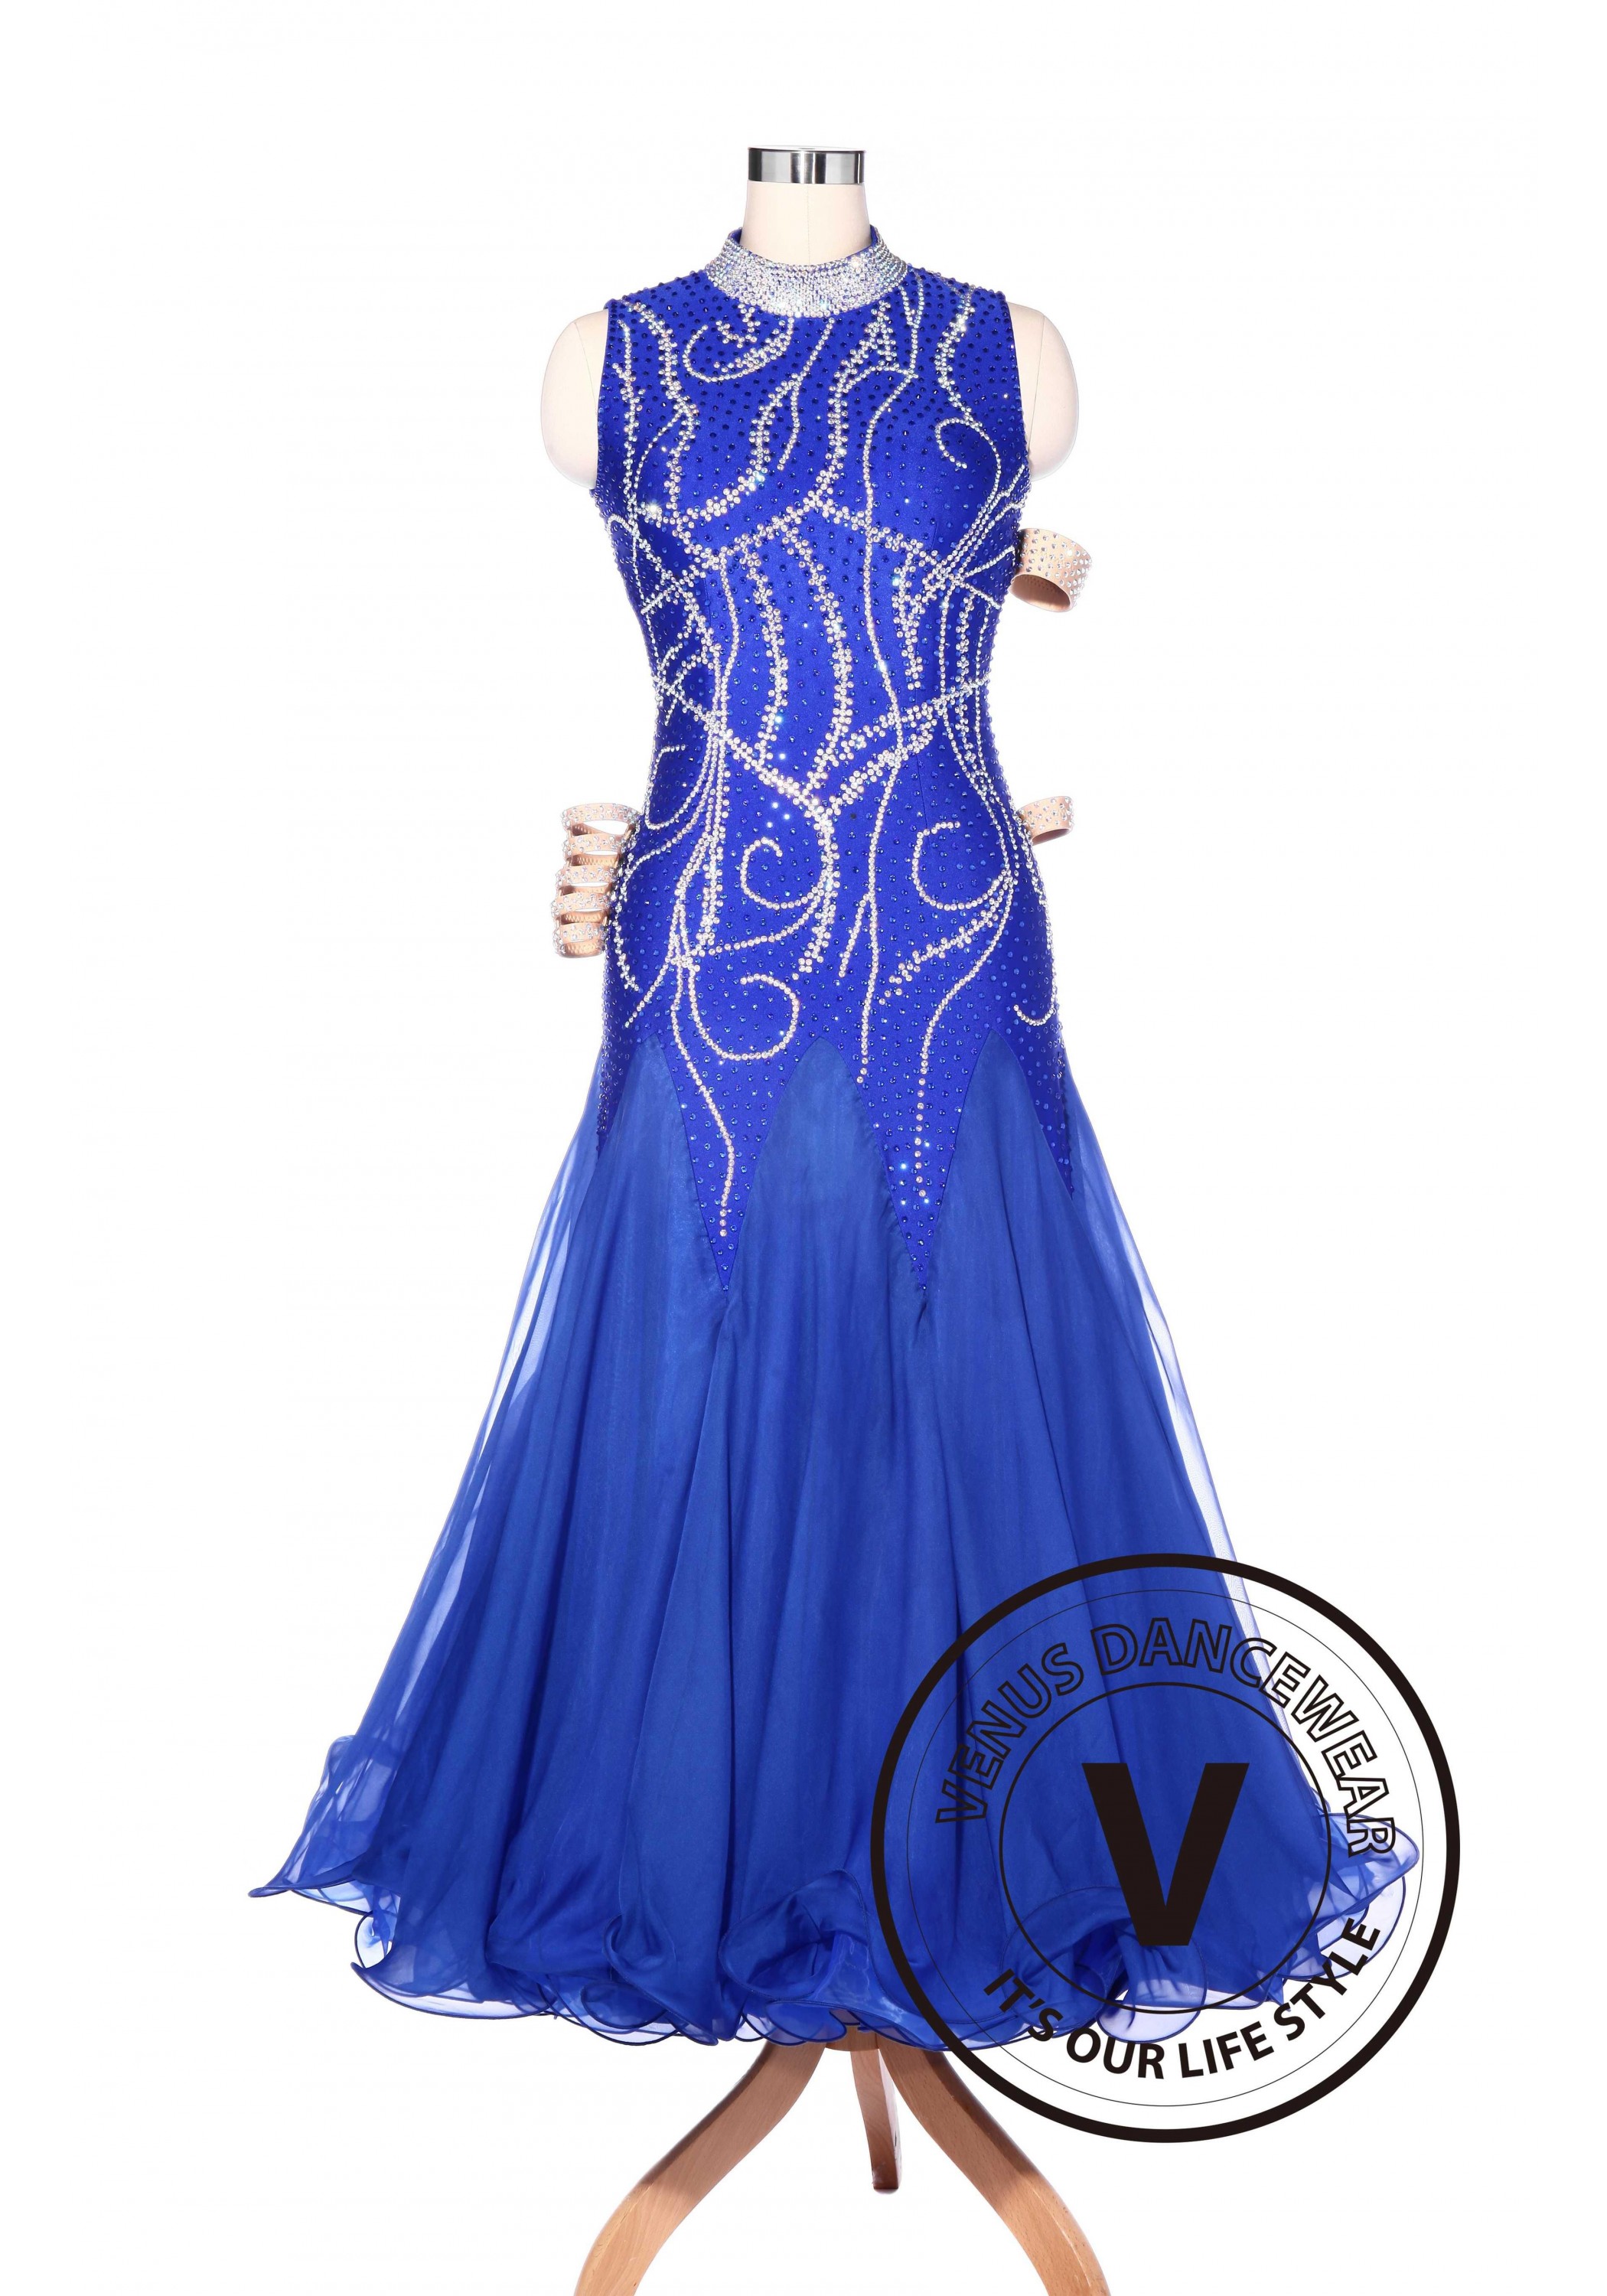 Luxury Elegant Royal Blue American Smooth Standard Competition Dress